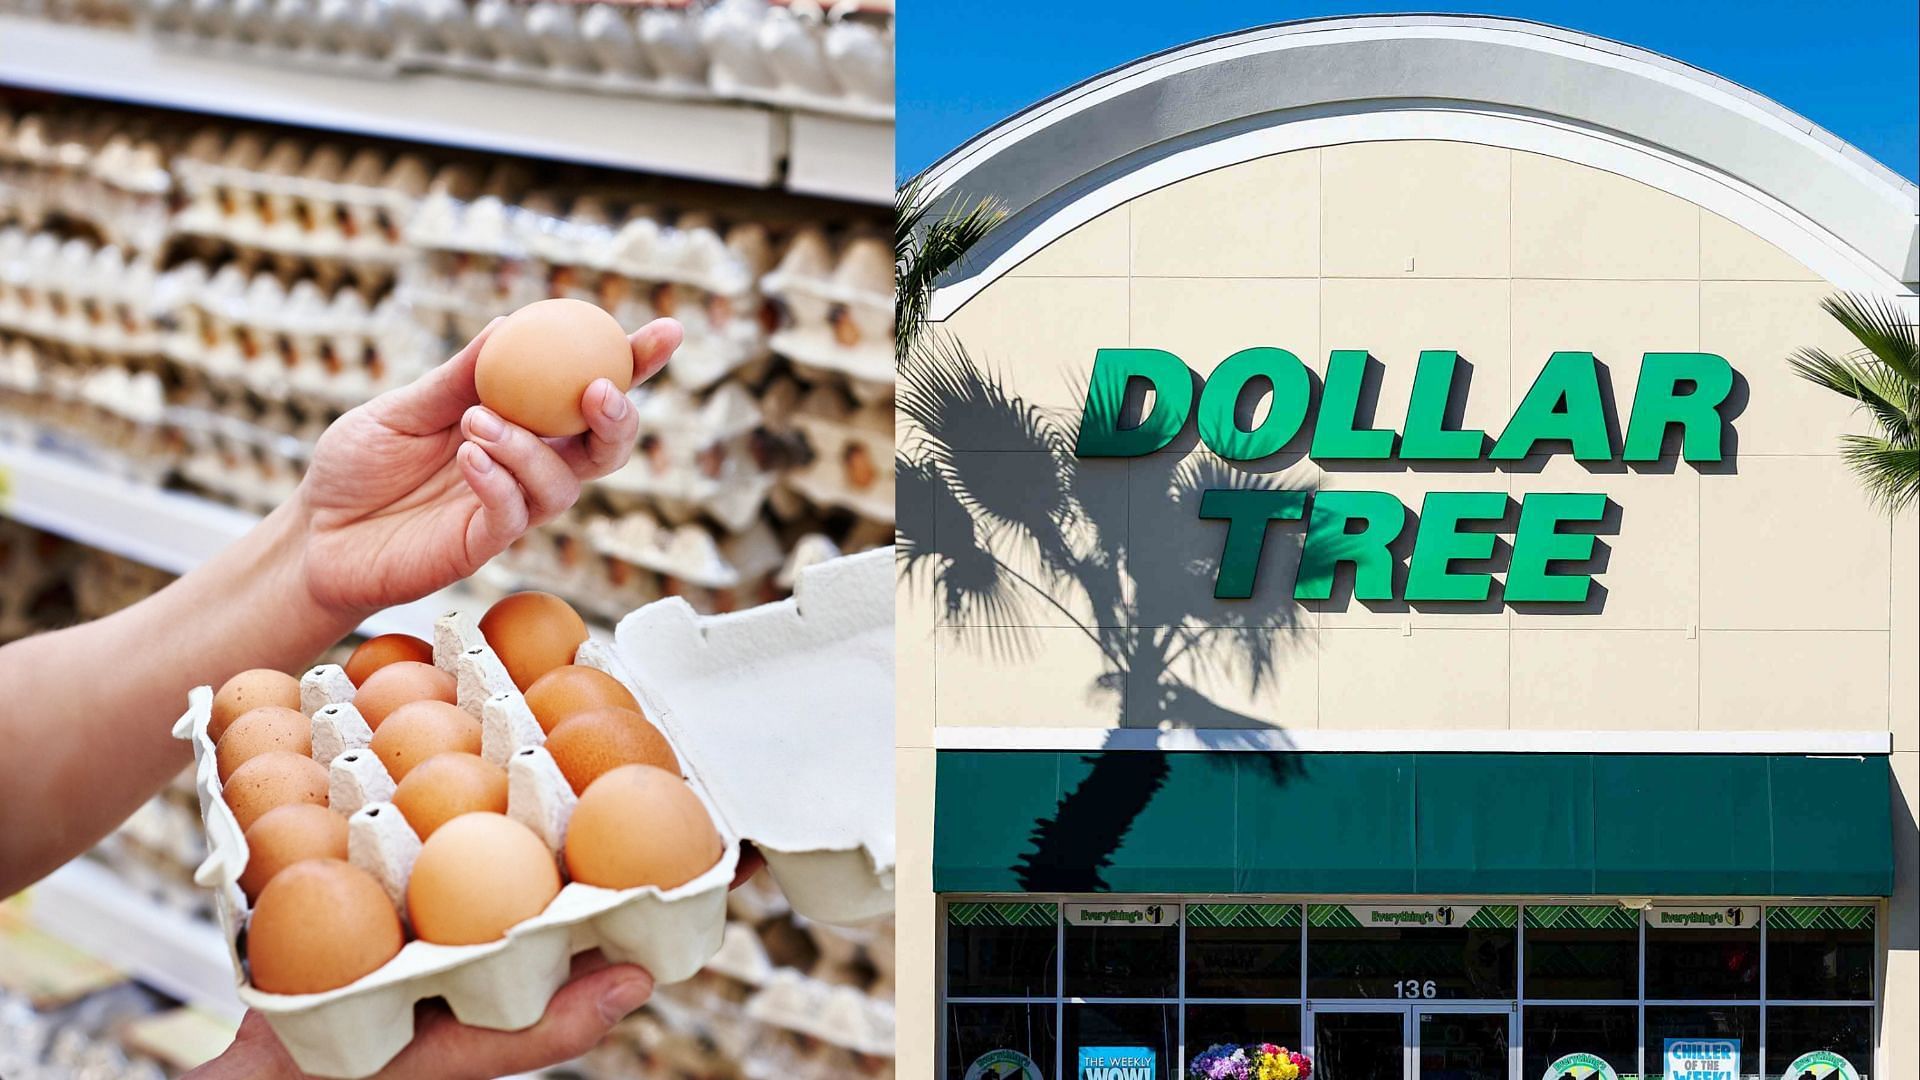 Multi-price point store, Dollar Tree, to stop selling eggs for the forseeable future starting March 2023 (Image via Sergeyryzhov/John Greim/Getty Images)